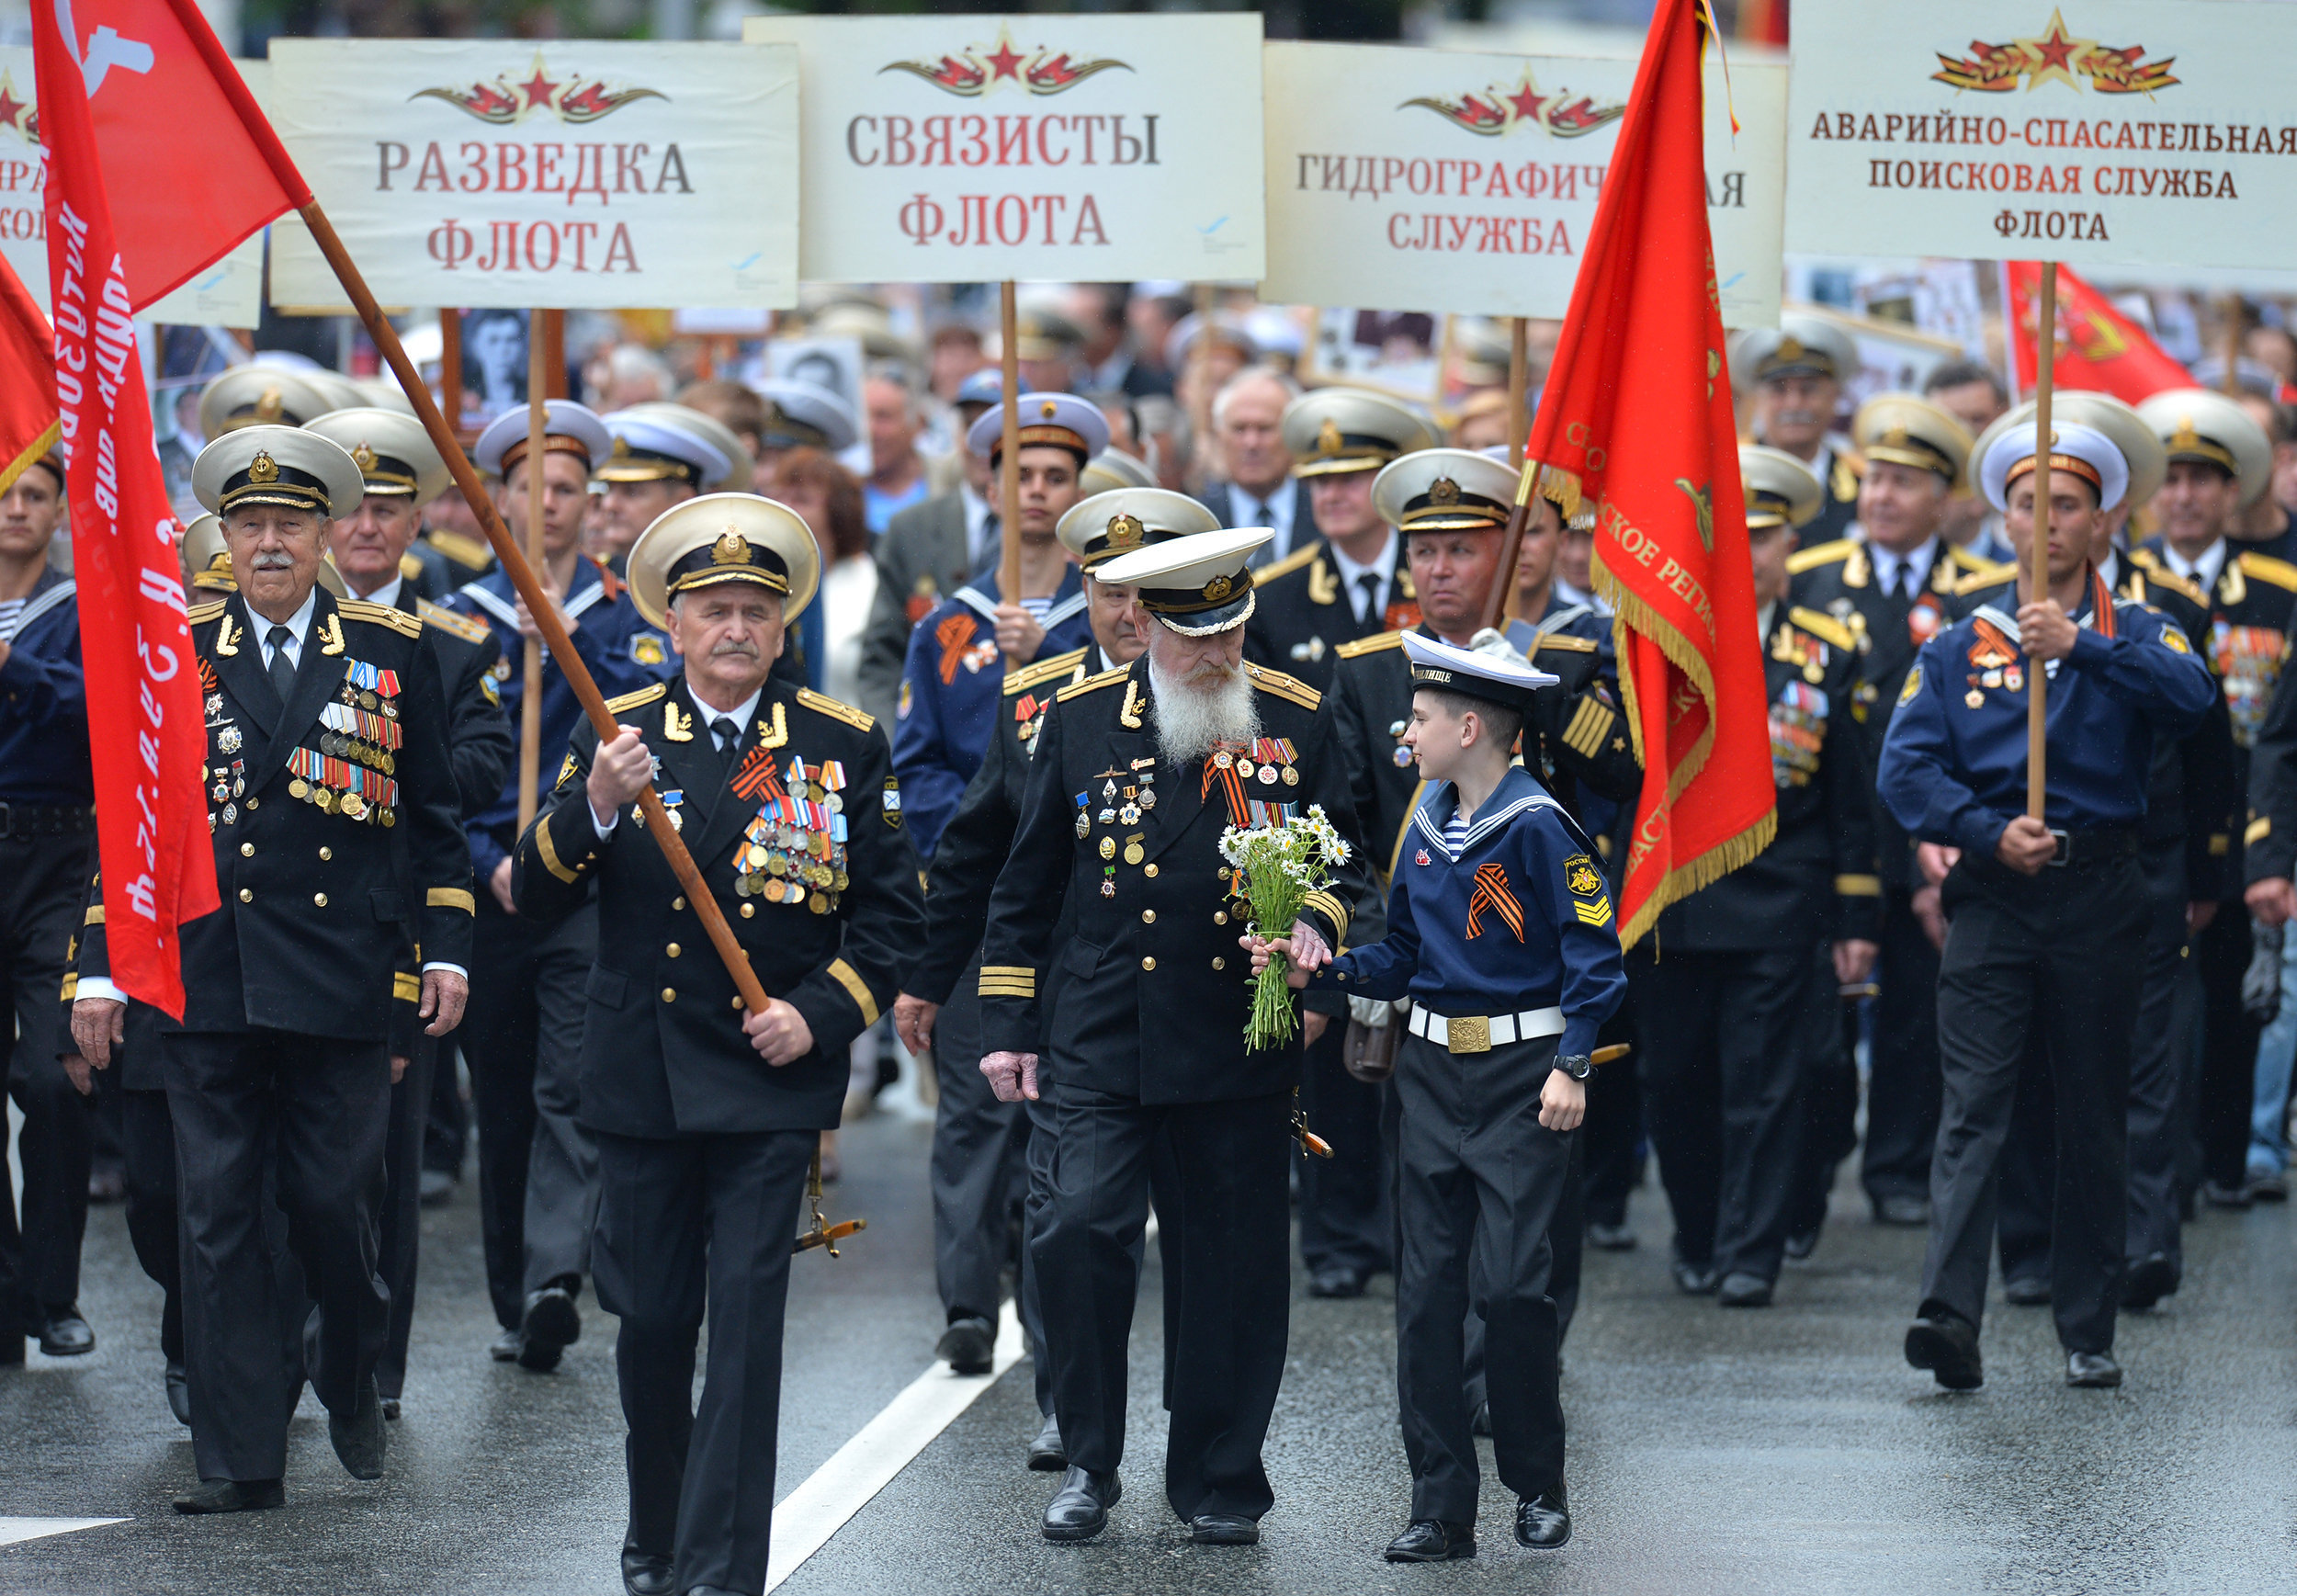 Participants in the military parade in Sevastopol marking the 73rd anniversary of Victory in the Great Patriotic War